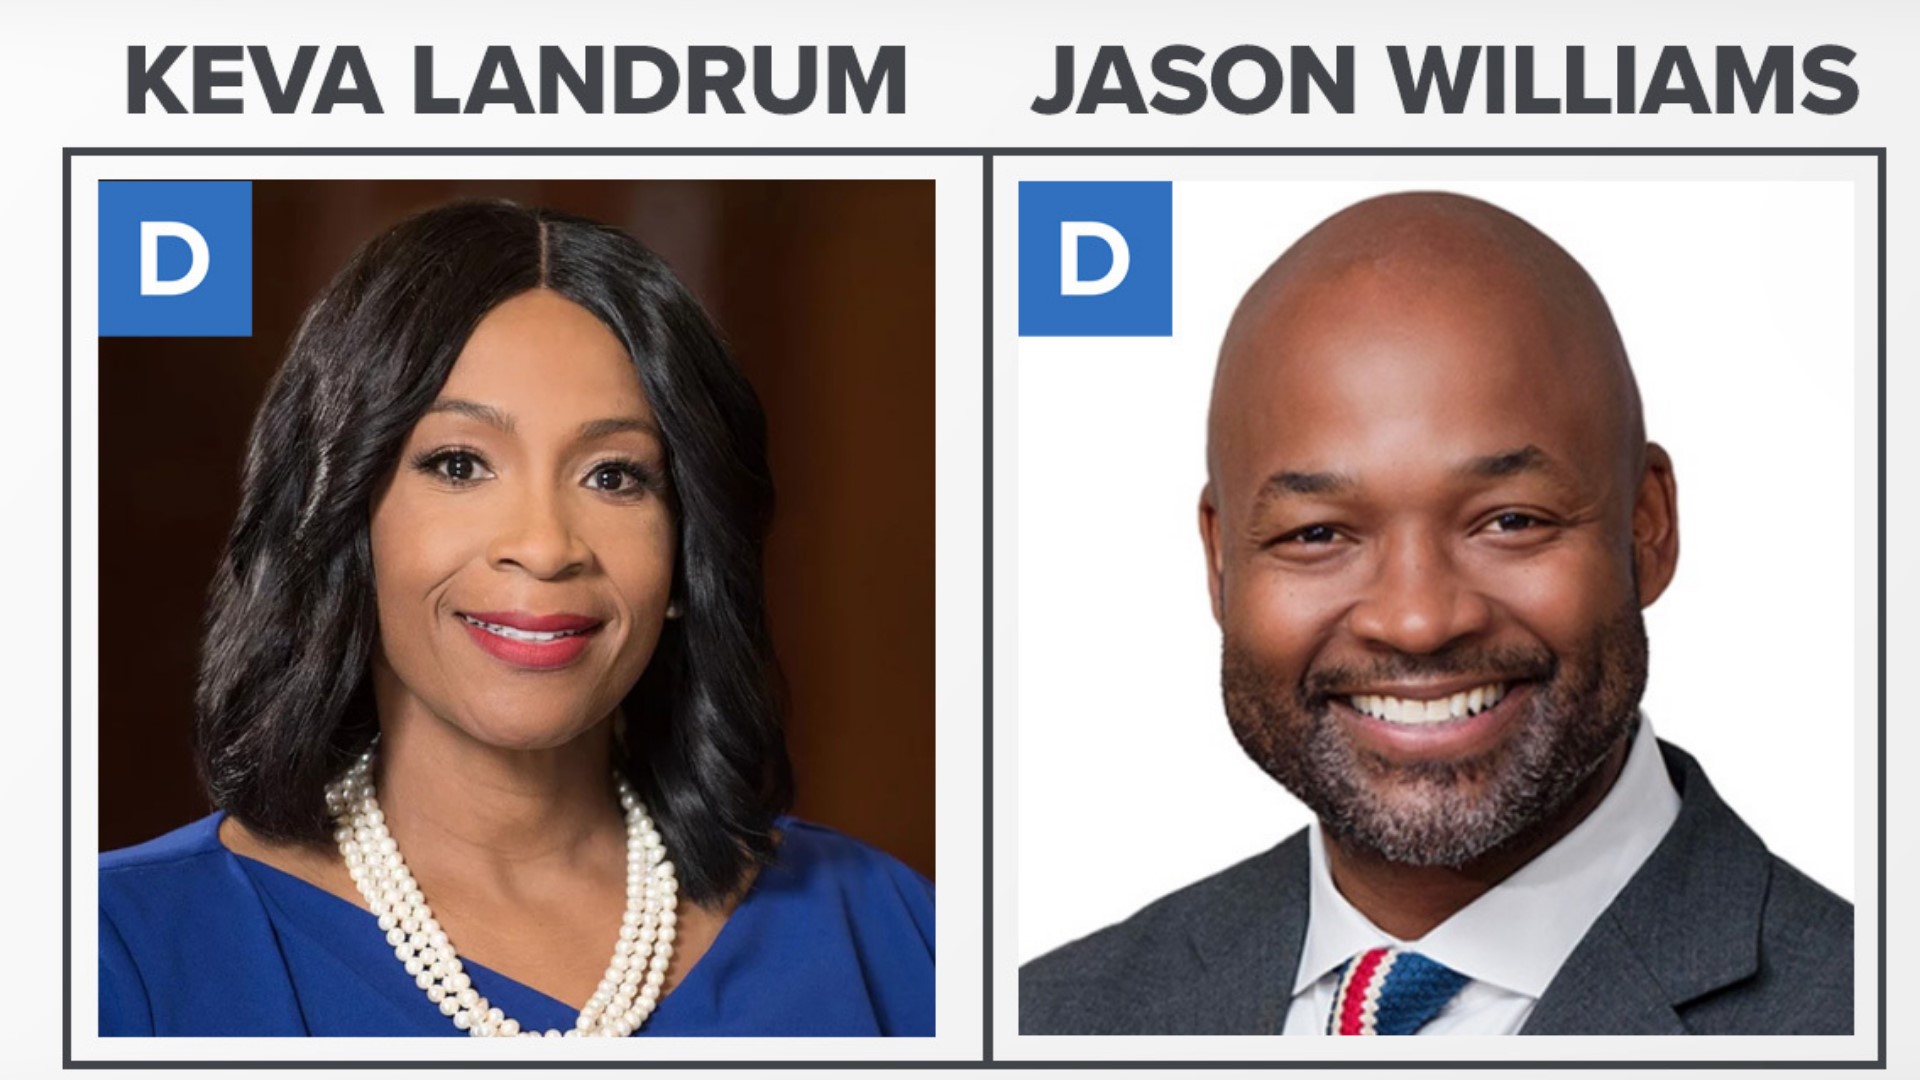 Both candidates in the runoff for district attorney— Jason Williams & Keva Landrum— want to take a different approach from current District Attorney Leon Cannizzaro.